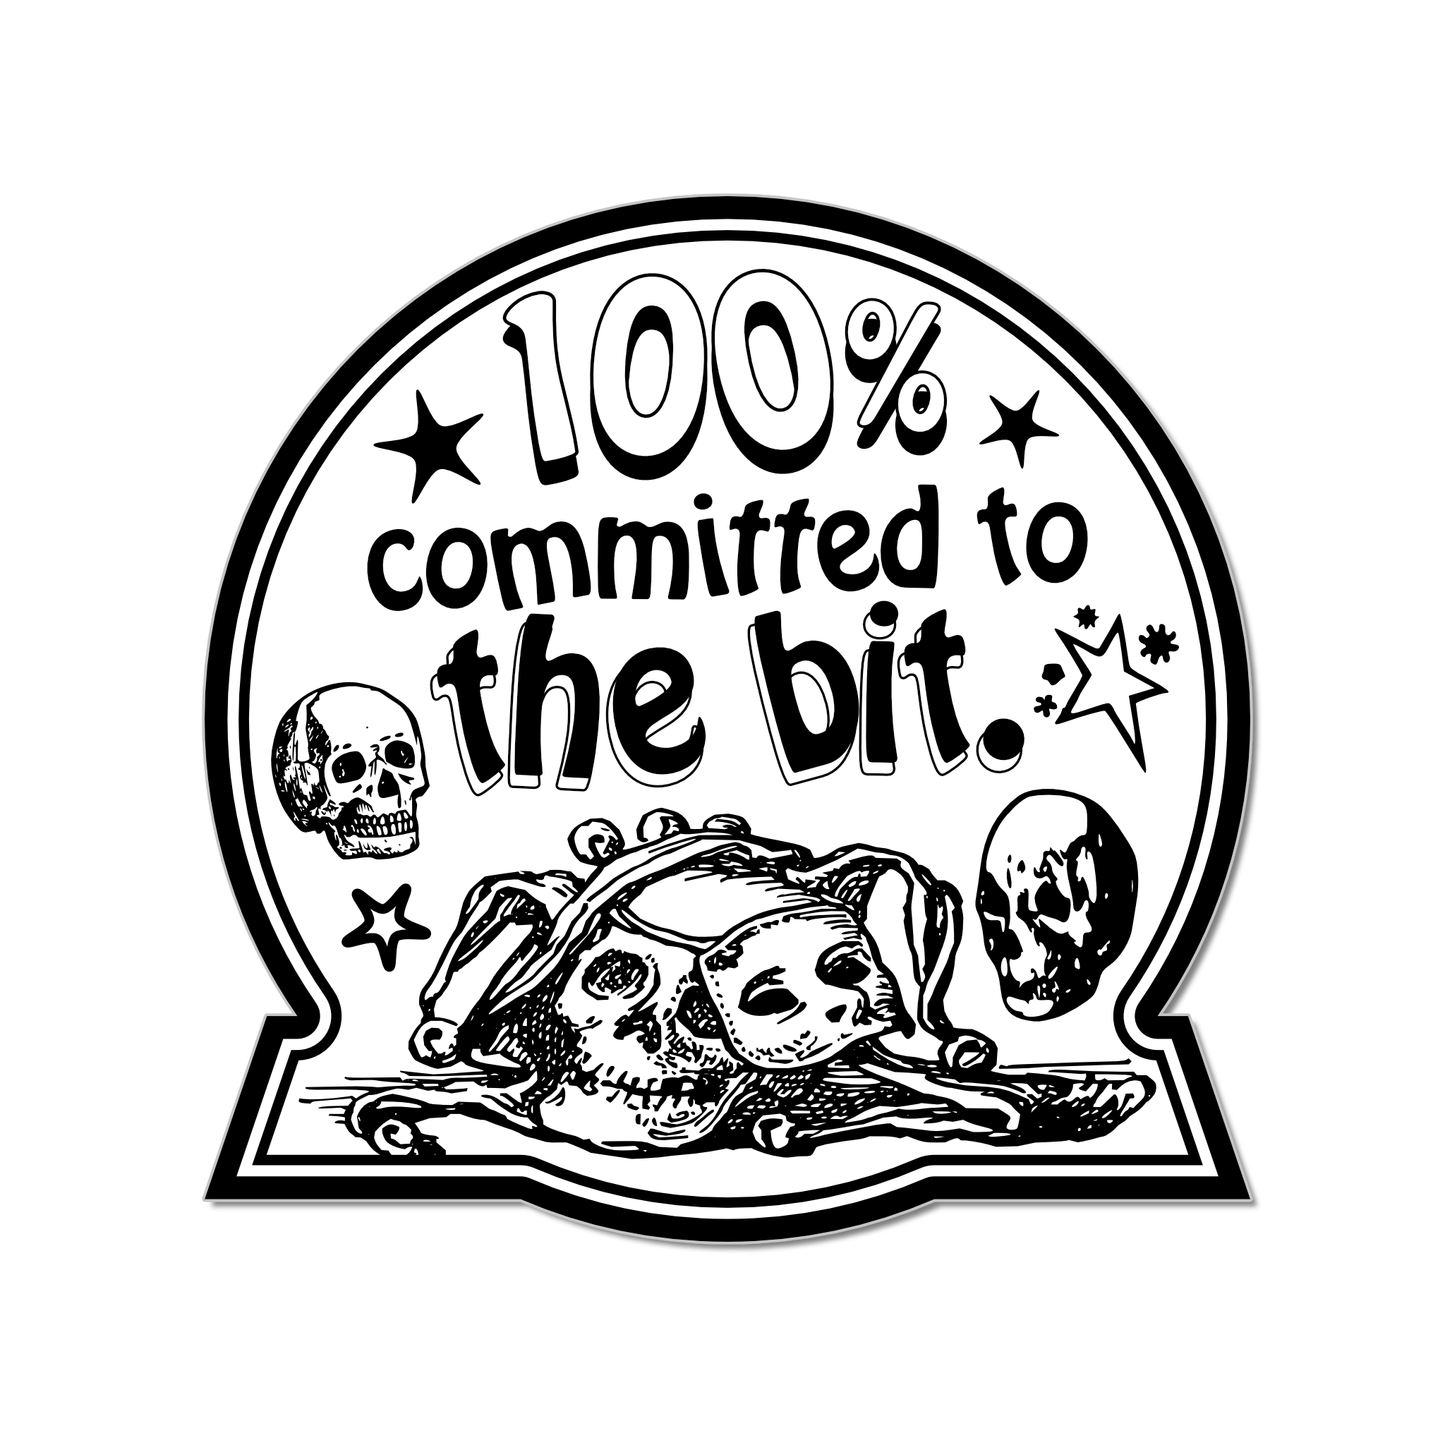 "Committed To The Bit" Die-Cut Sticker